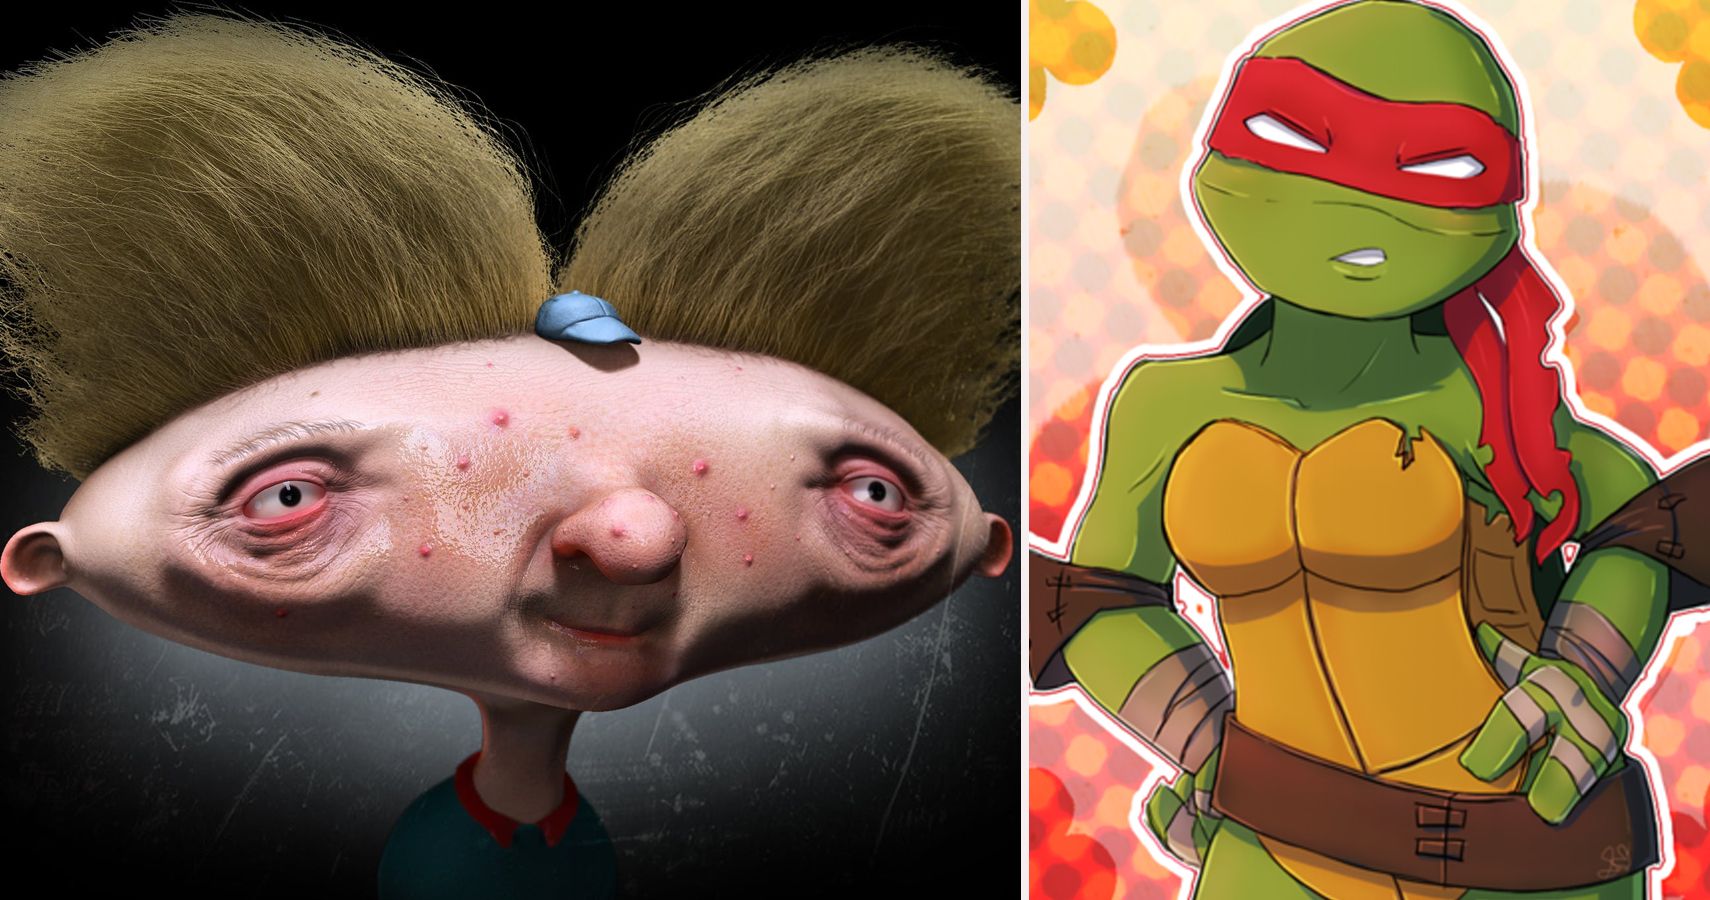 Inappropriate Fan Art Of Nickelodeon Kids Characters That We Wish Didn